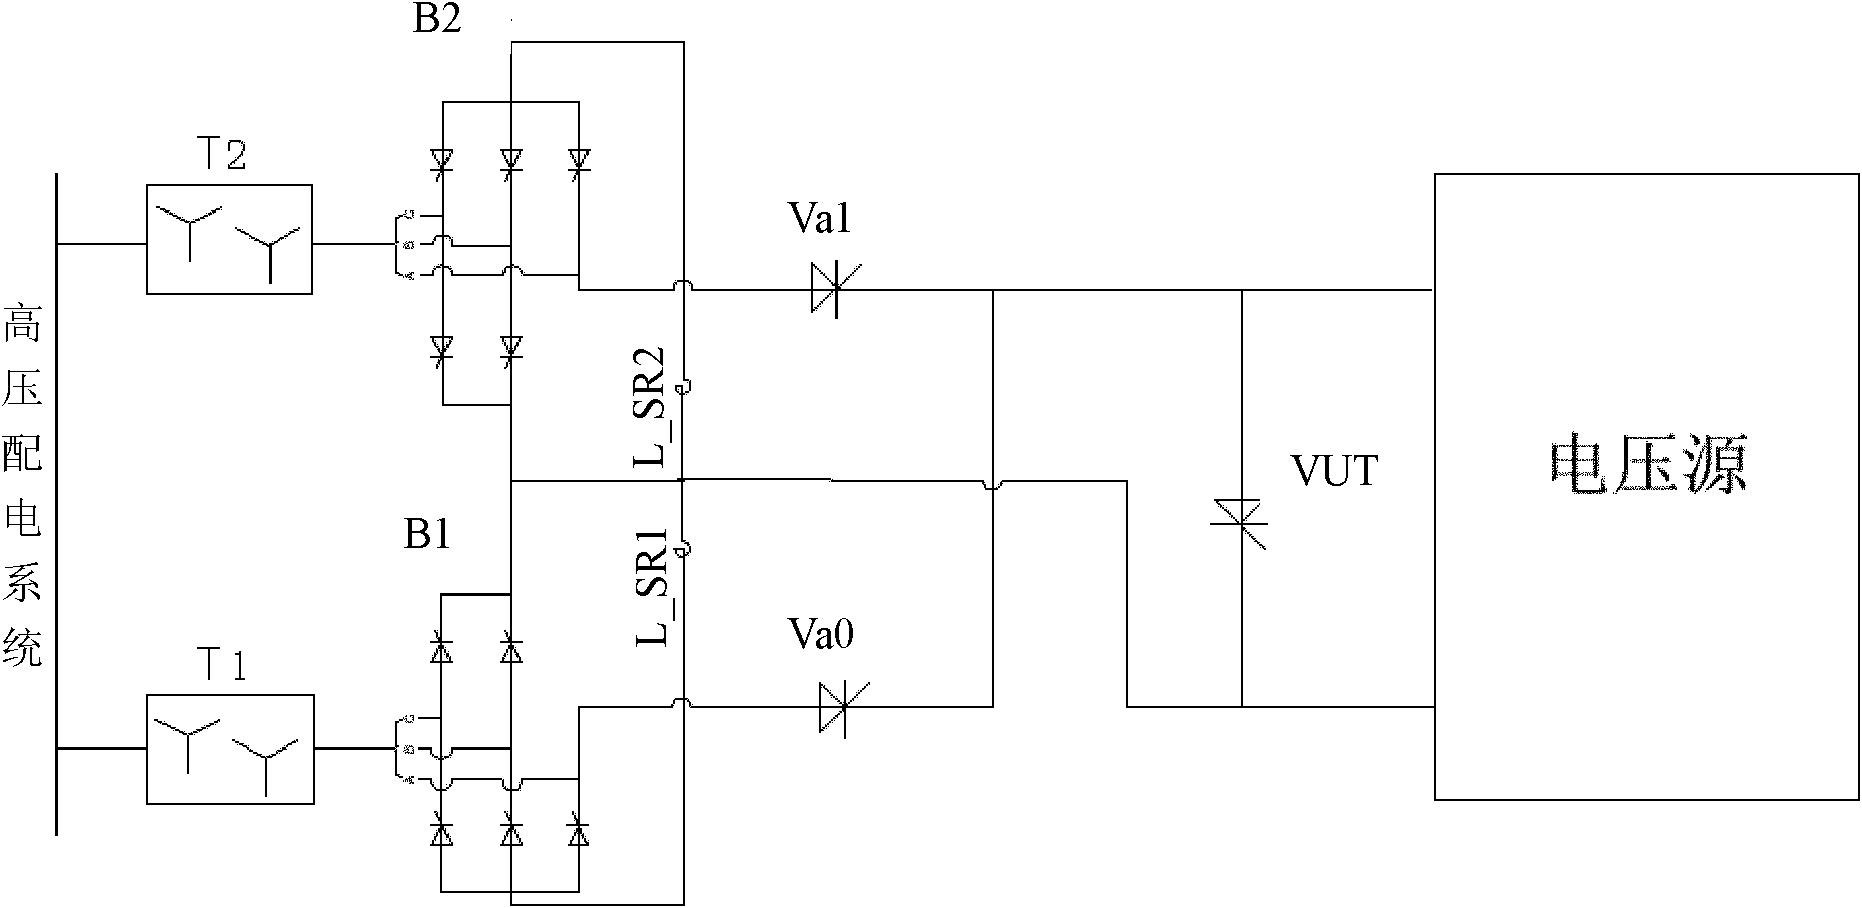 Synthesis loop for running test of converter valve for direct current power transmission project